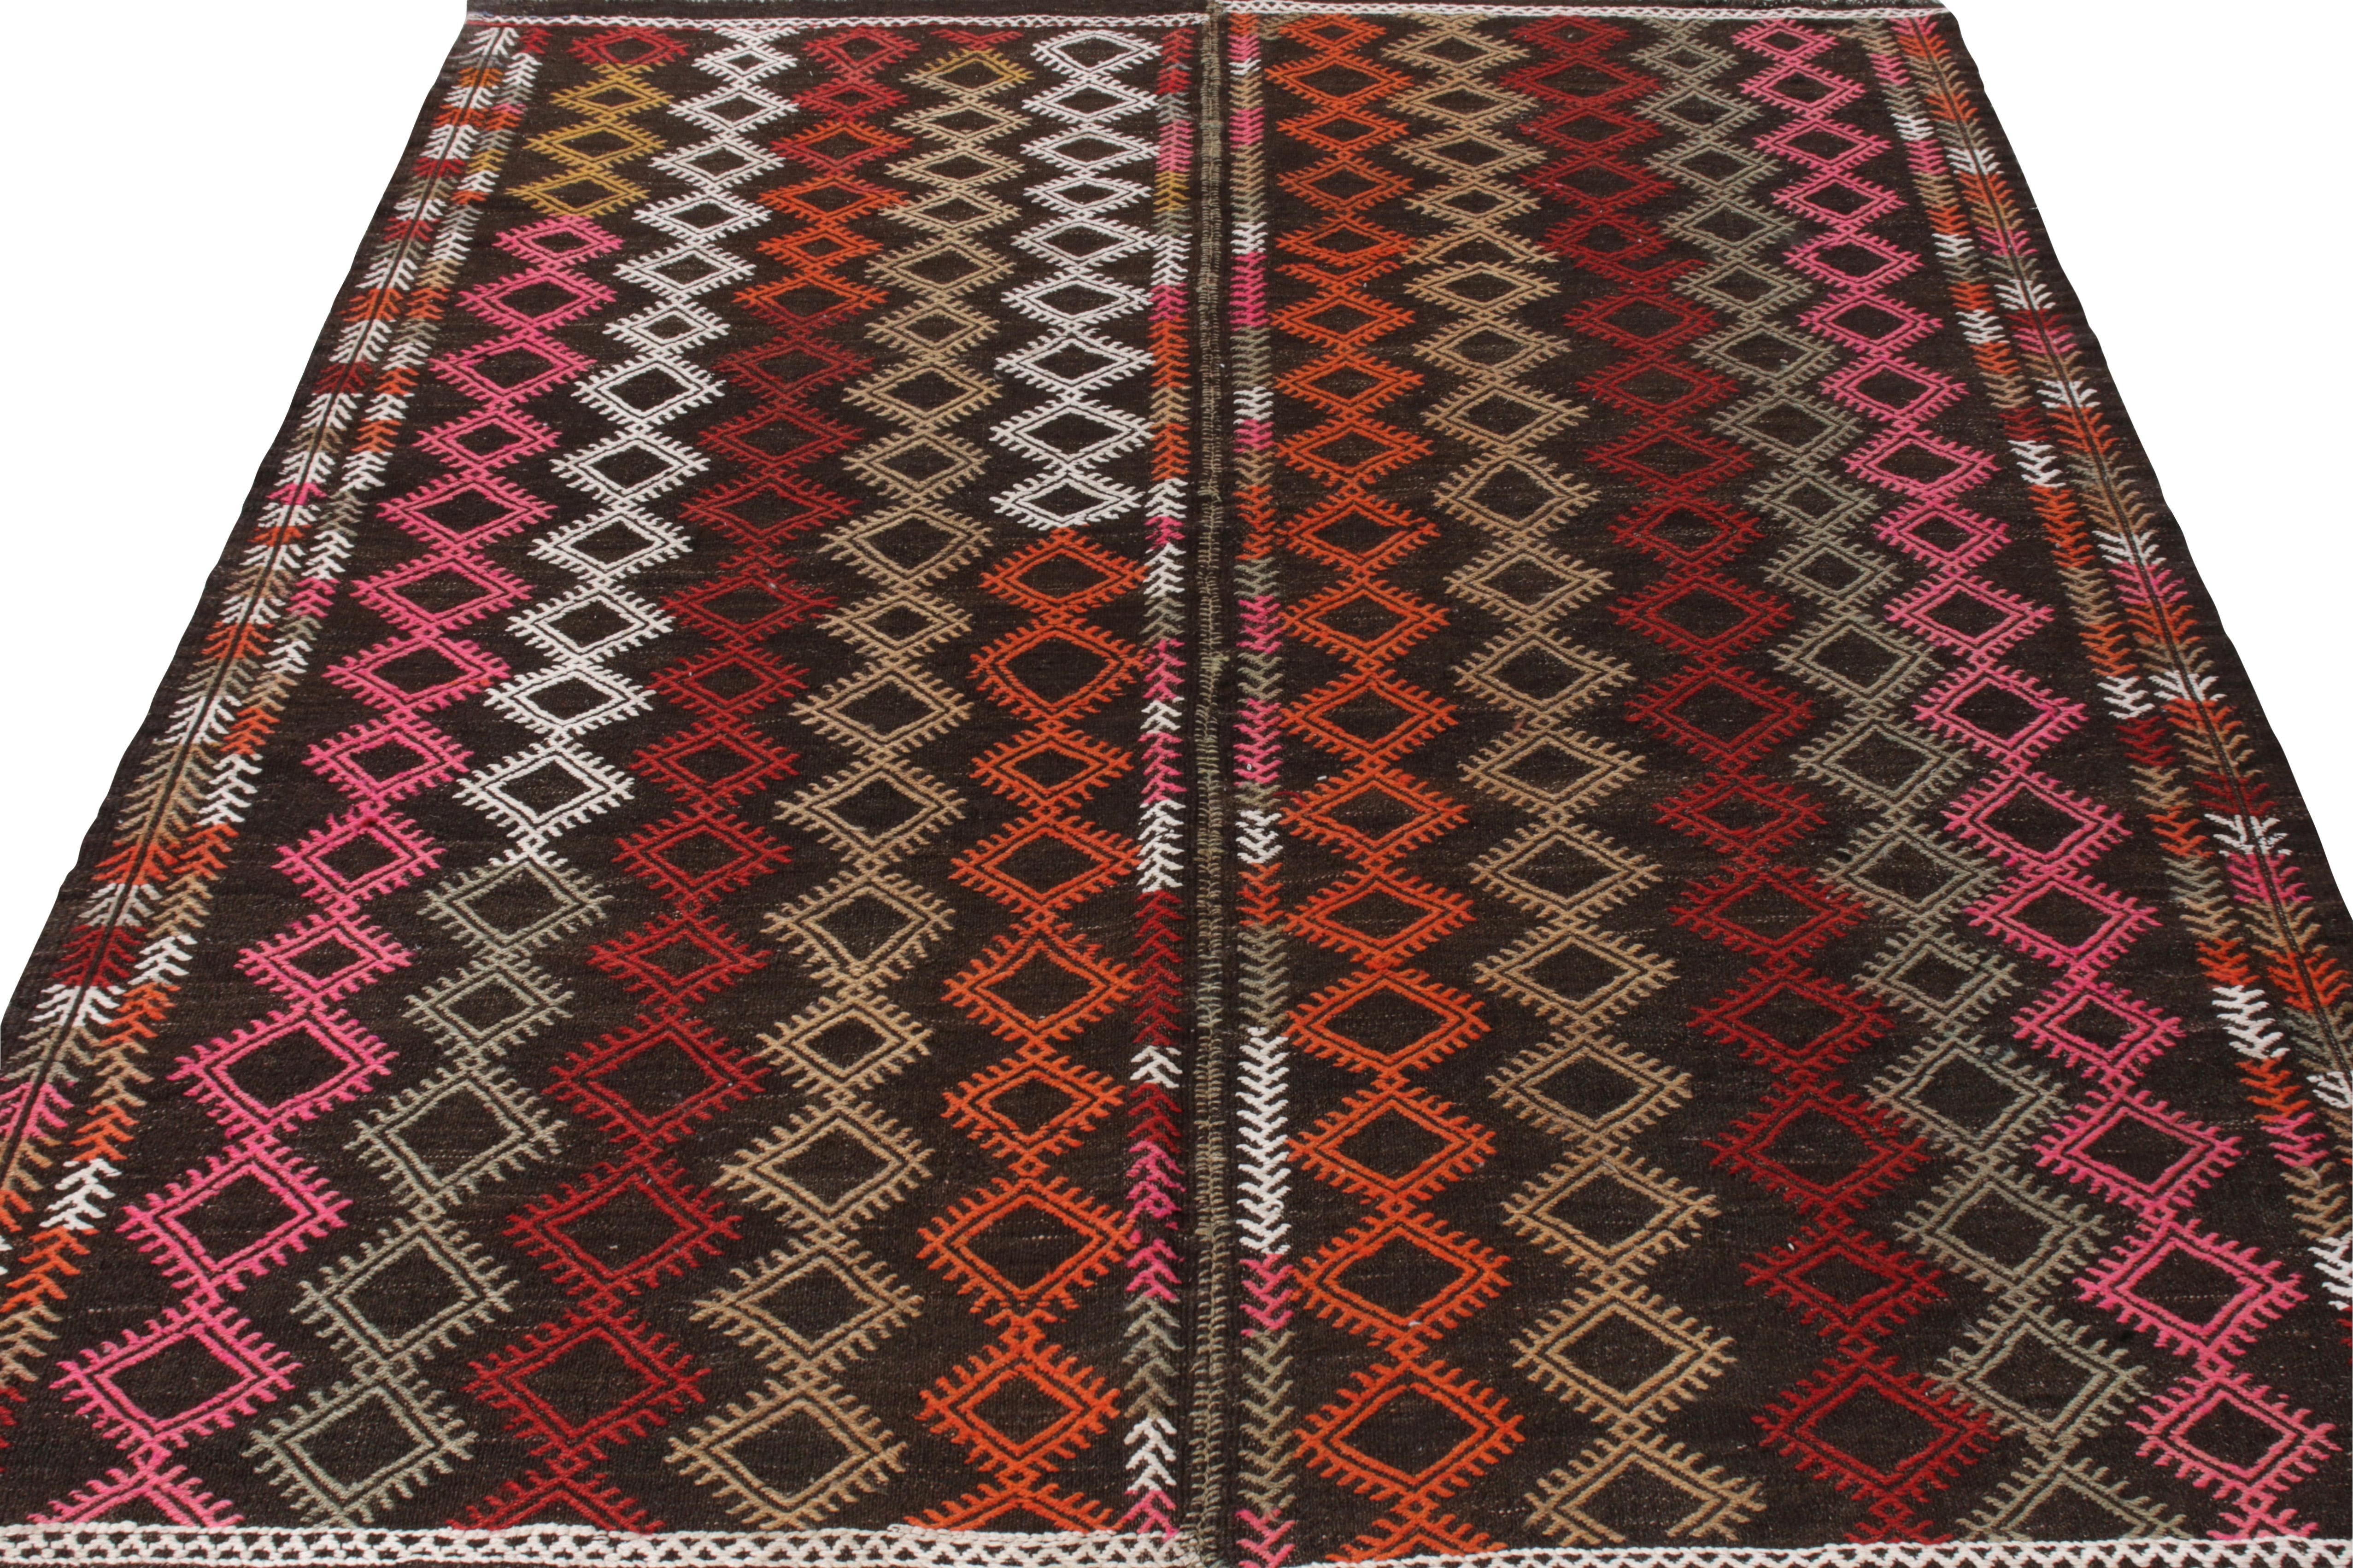 A 6x8 vintage Kilim rug, handwoven in Turkey circa 1970-1980 now entering Rug & Kilim’s coveted Kilim & Flatweave collection.This distinctive style is woven in two panels together with an appreciable high-low textural sensibility in the embroidery.